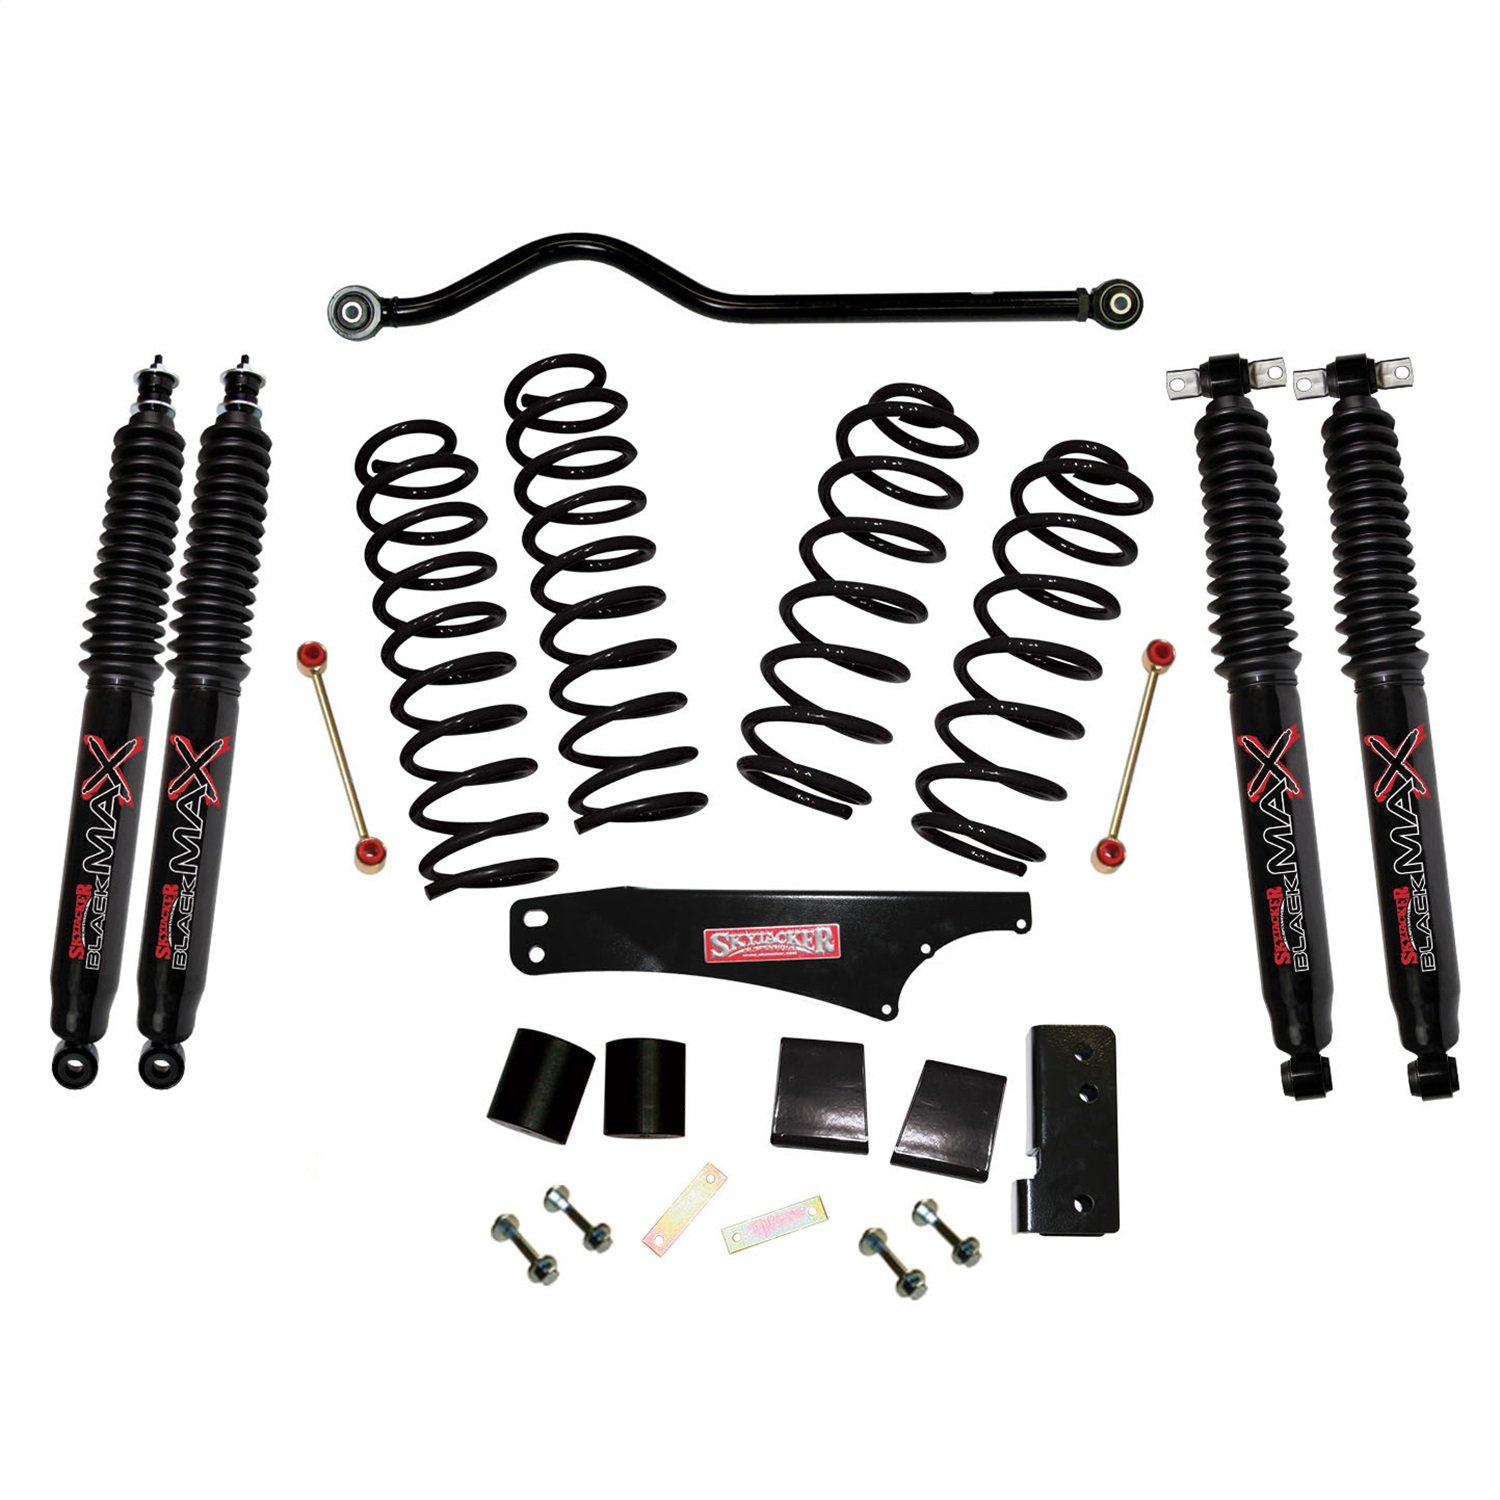 JK40BPBSR Front and Rear Suspension Lift Kit, Lift Amount: 4 in. Front/4 in. Rear